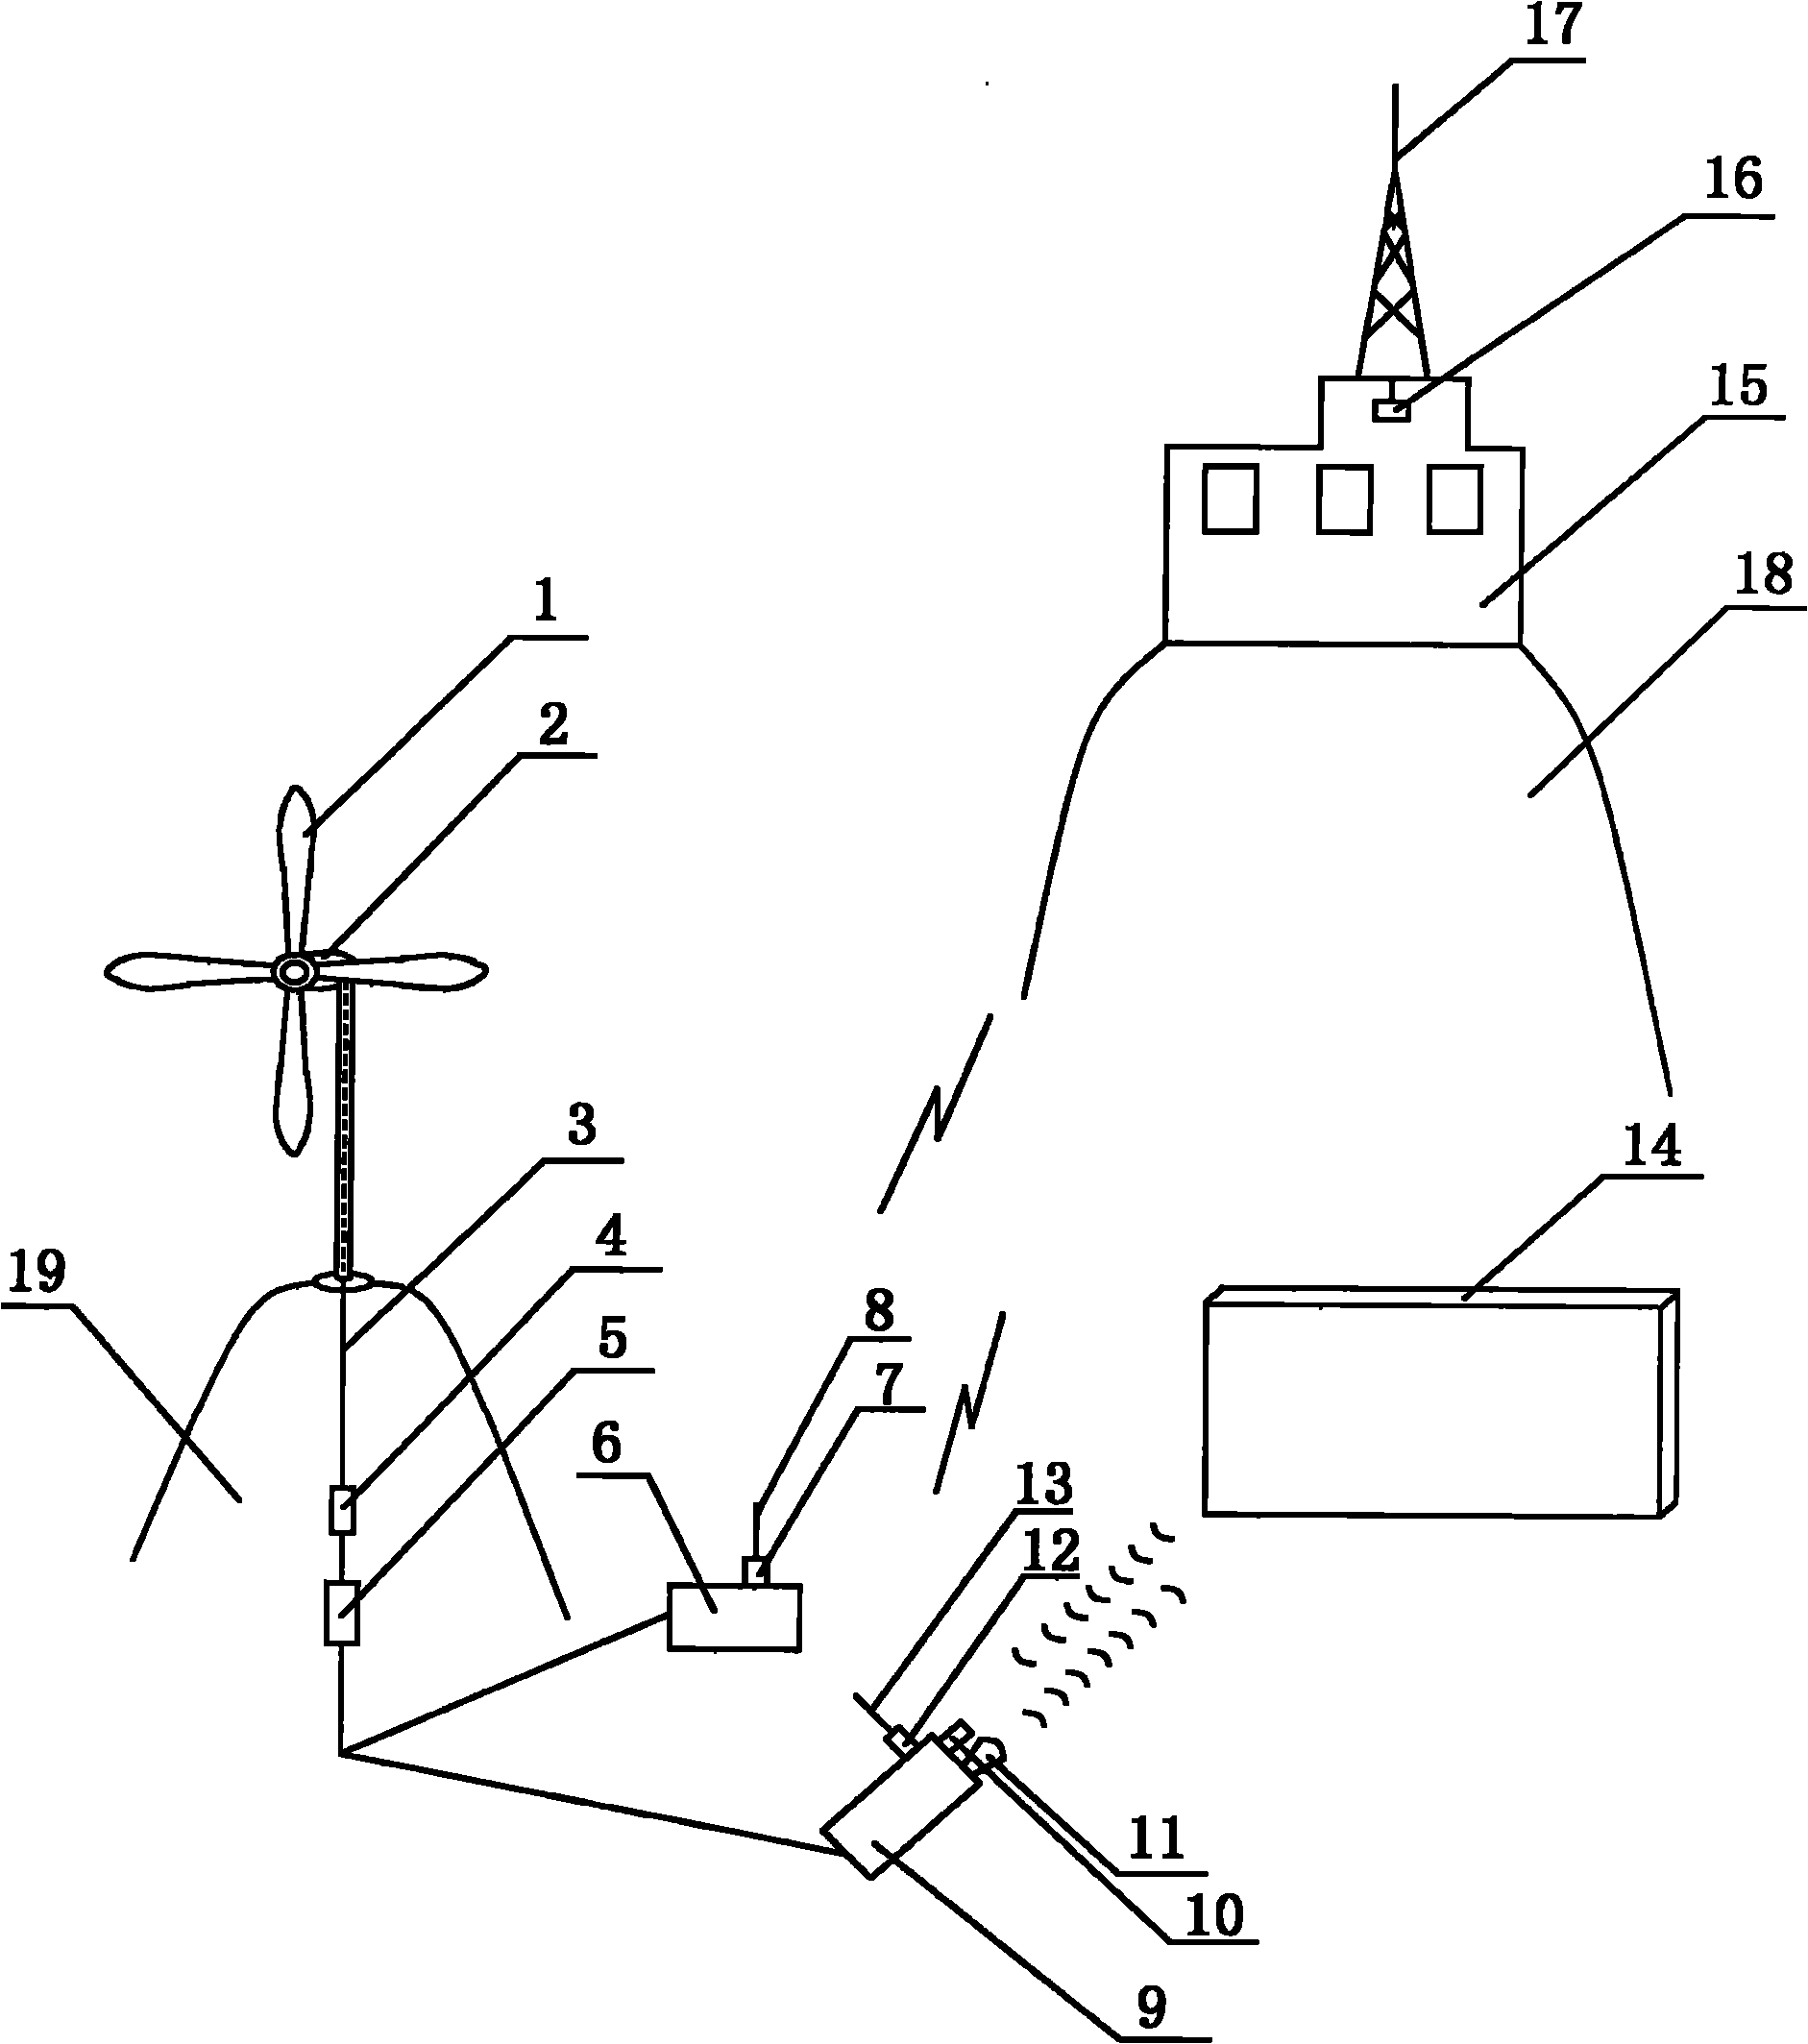 Power supply unit for applying wind generator system to earthquake prediction device